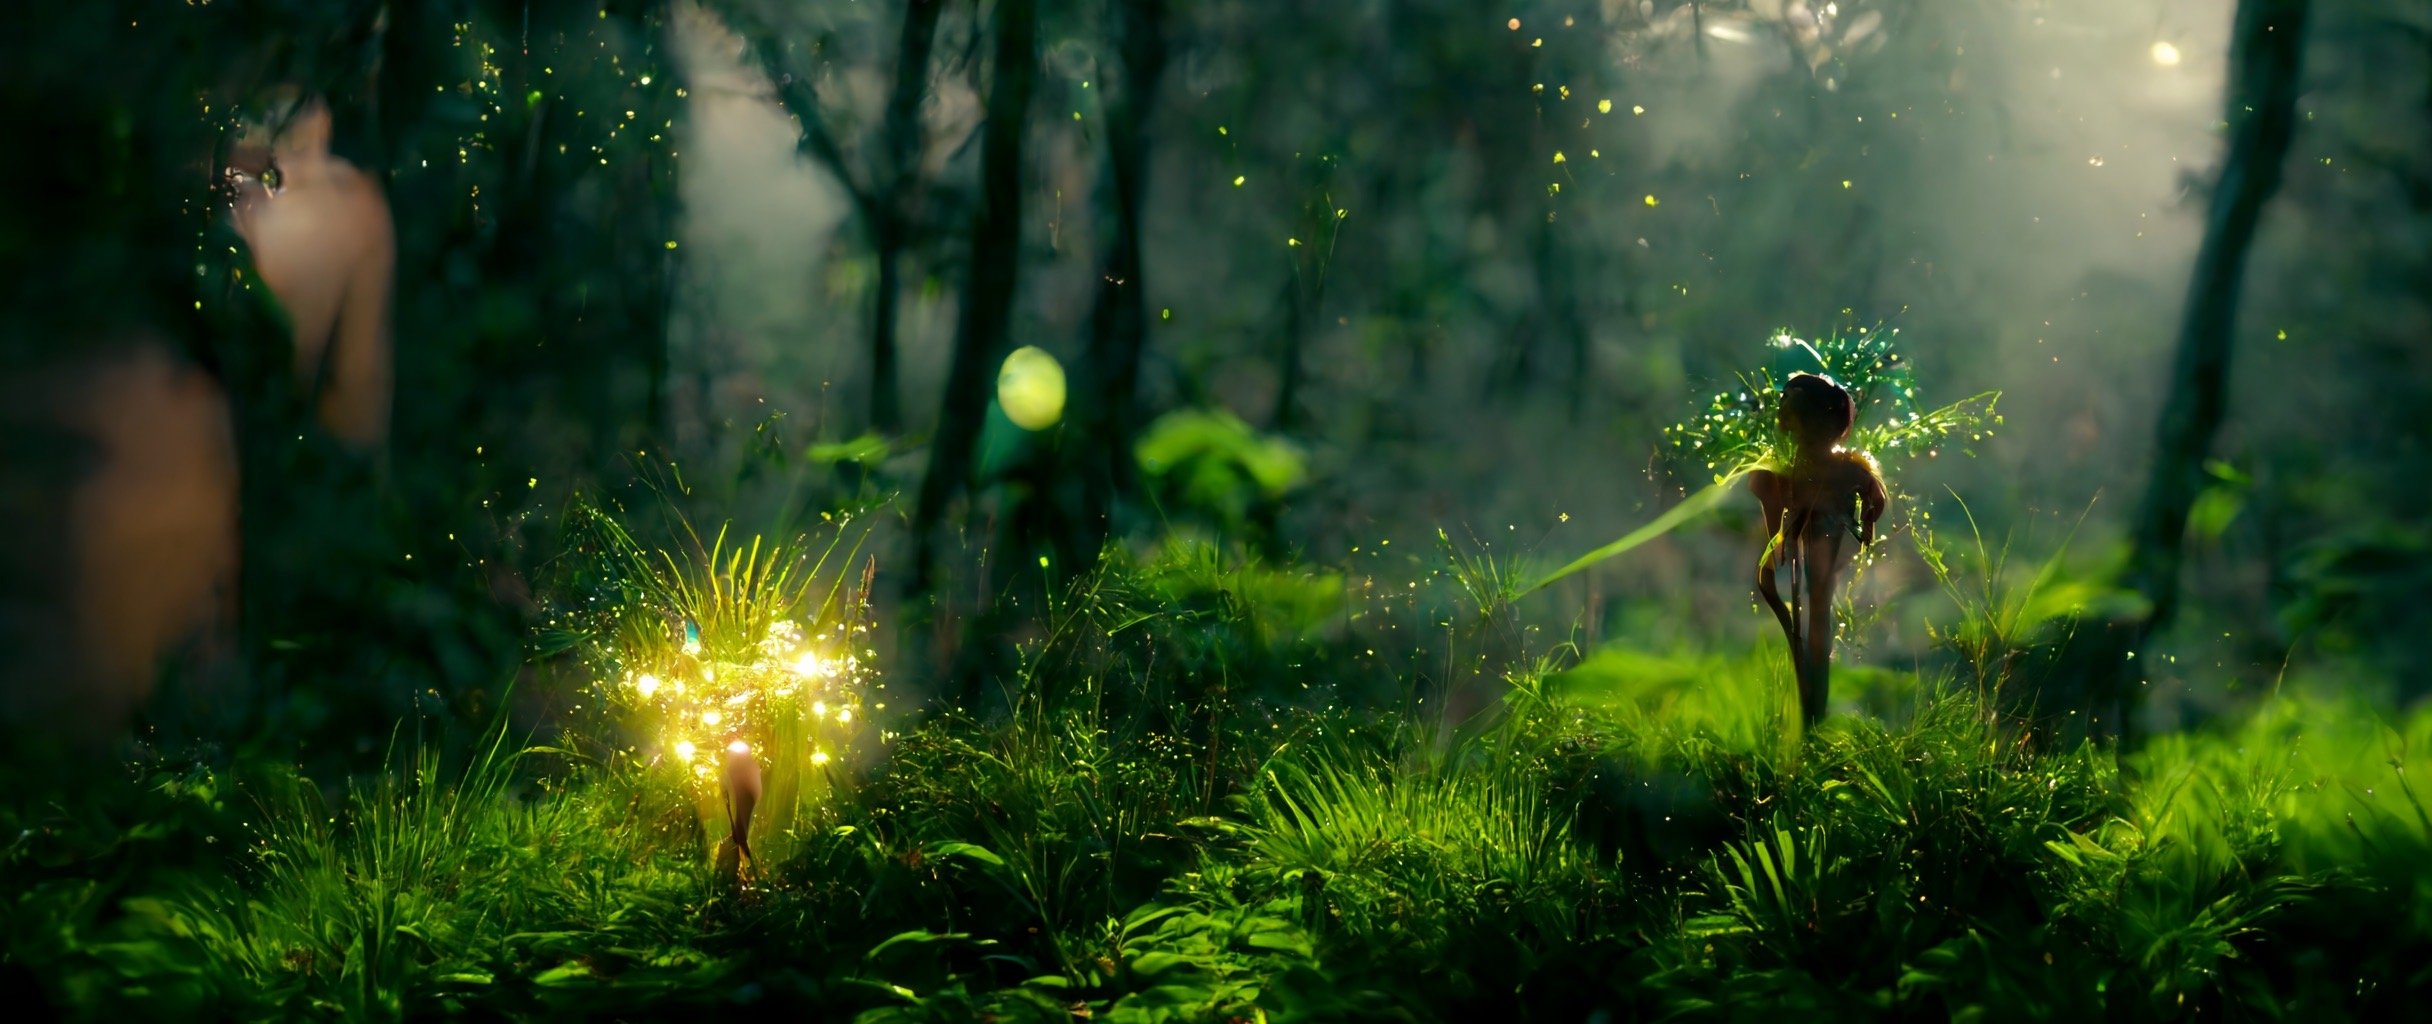 74c2630b-964f-41d5-917f-6d36475e3090_S3RAPH_1_lonely_glowing_sparkly_magical_fairy_off-roading_in_a_dense_dark_green_jungle._Mystical_vibe._cine.JPG